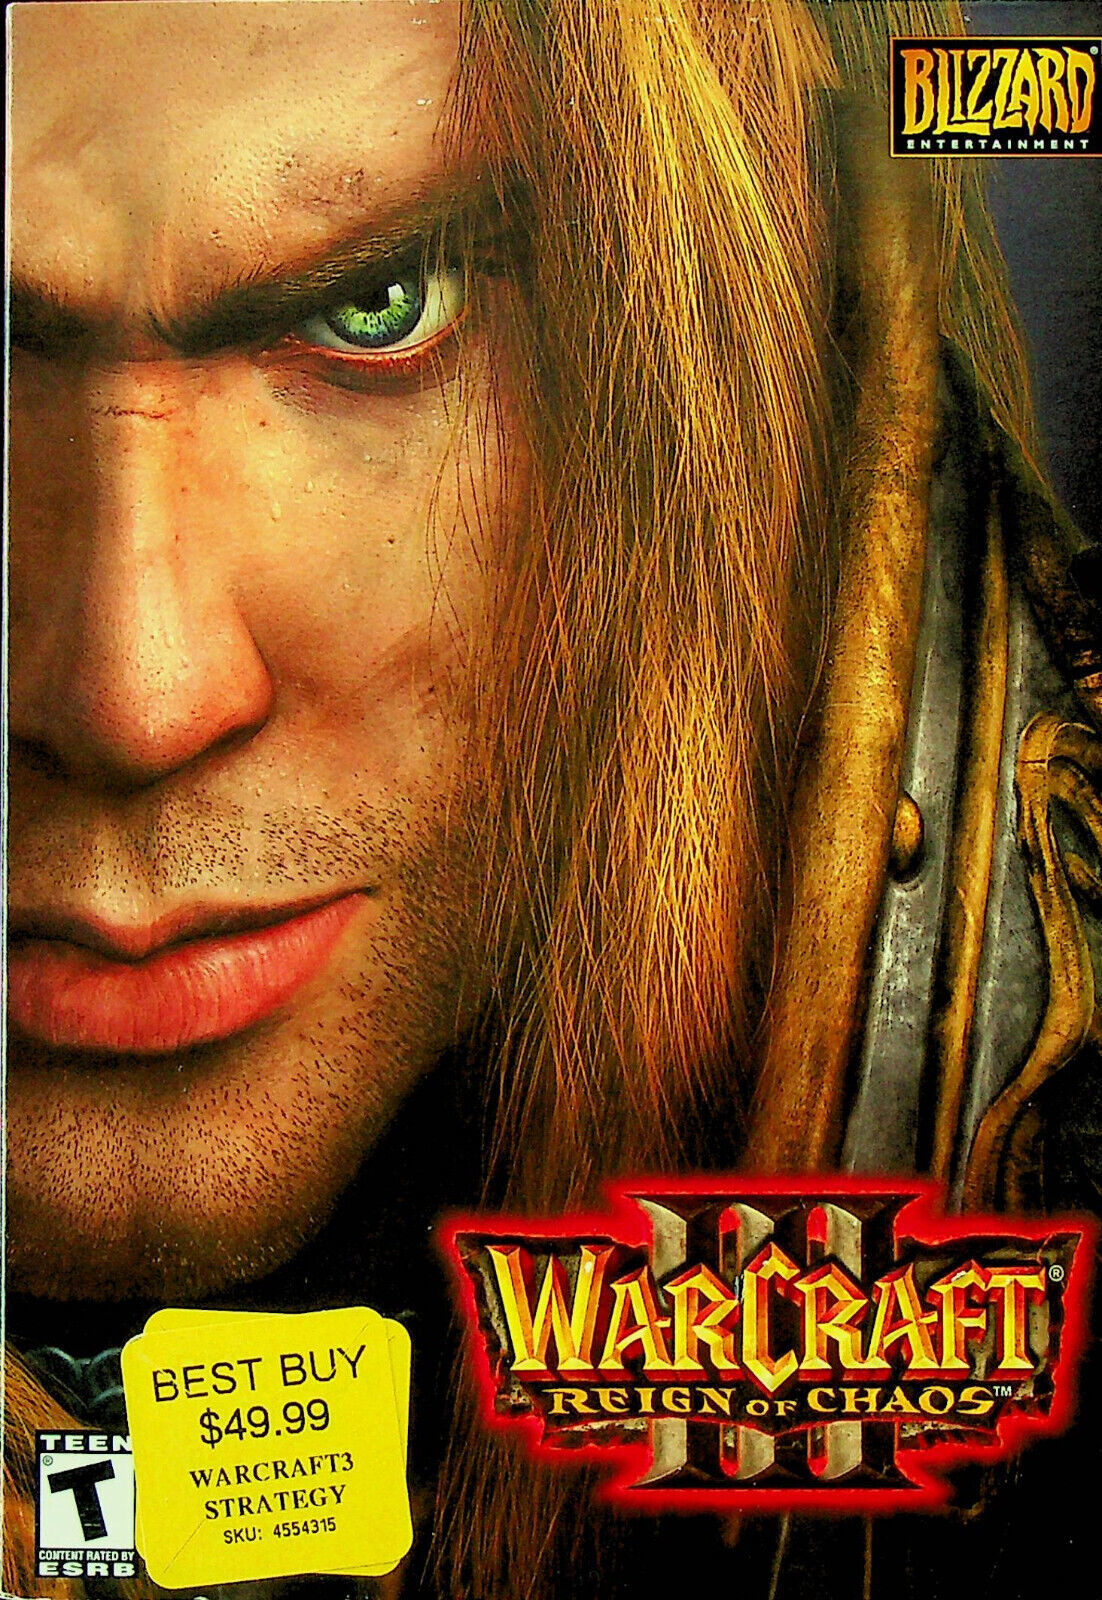 WarCraft III: Reign of Chaos (Windows/Mac, 2002) - Rated T - Unsealed & Unused - $74.79